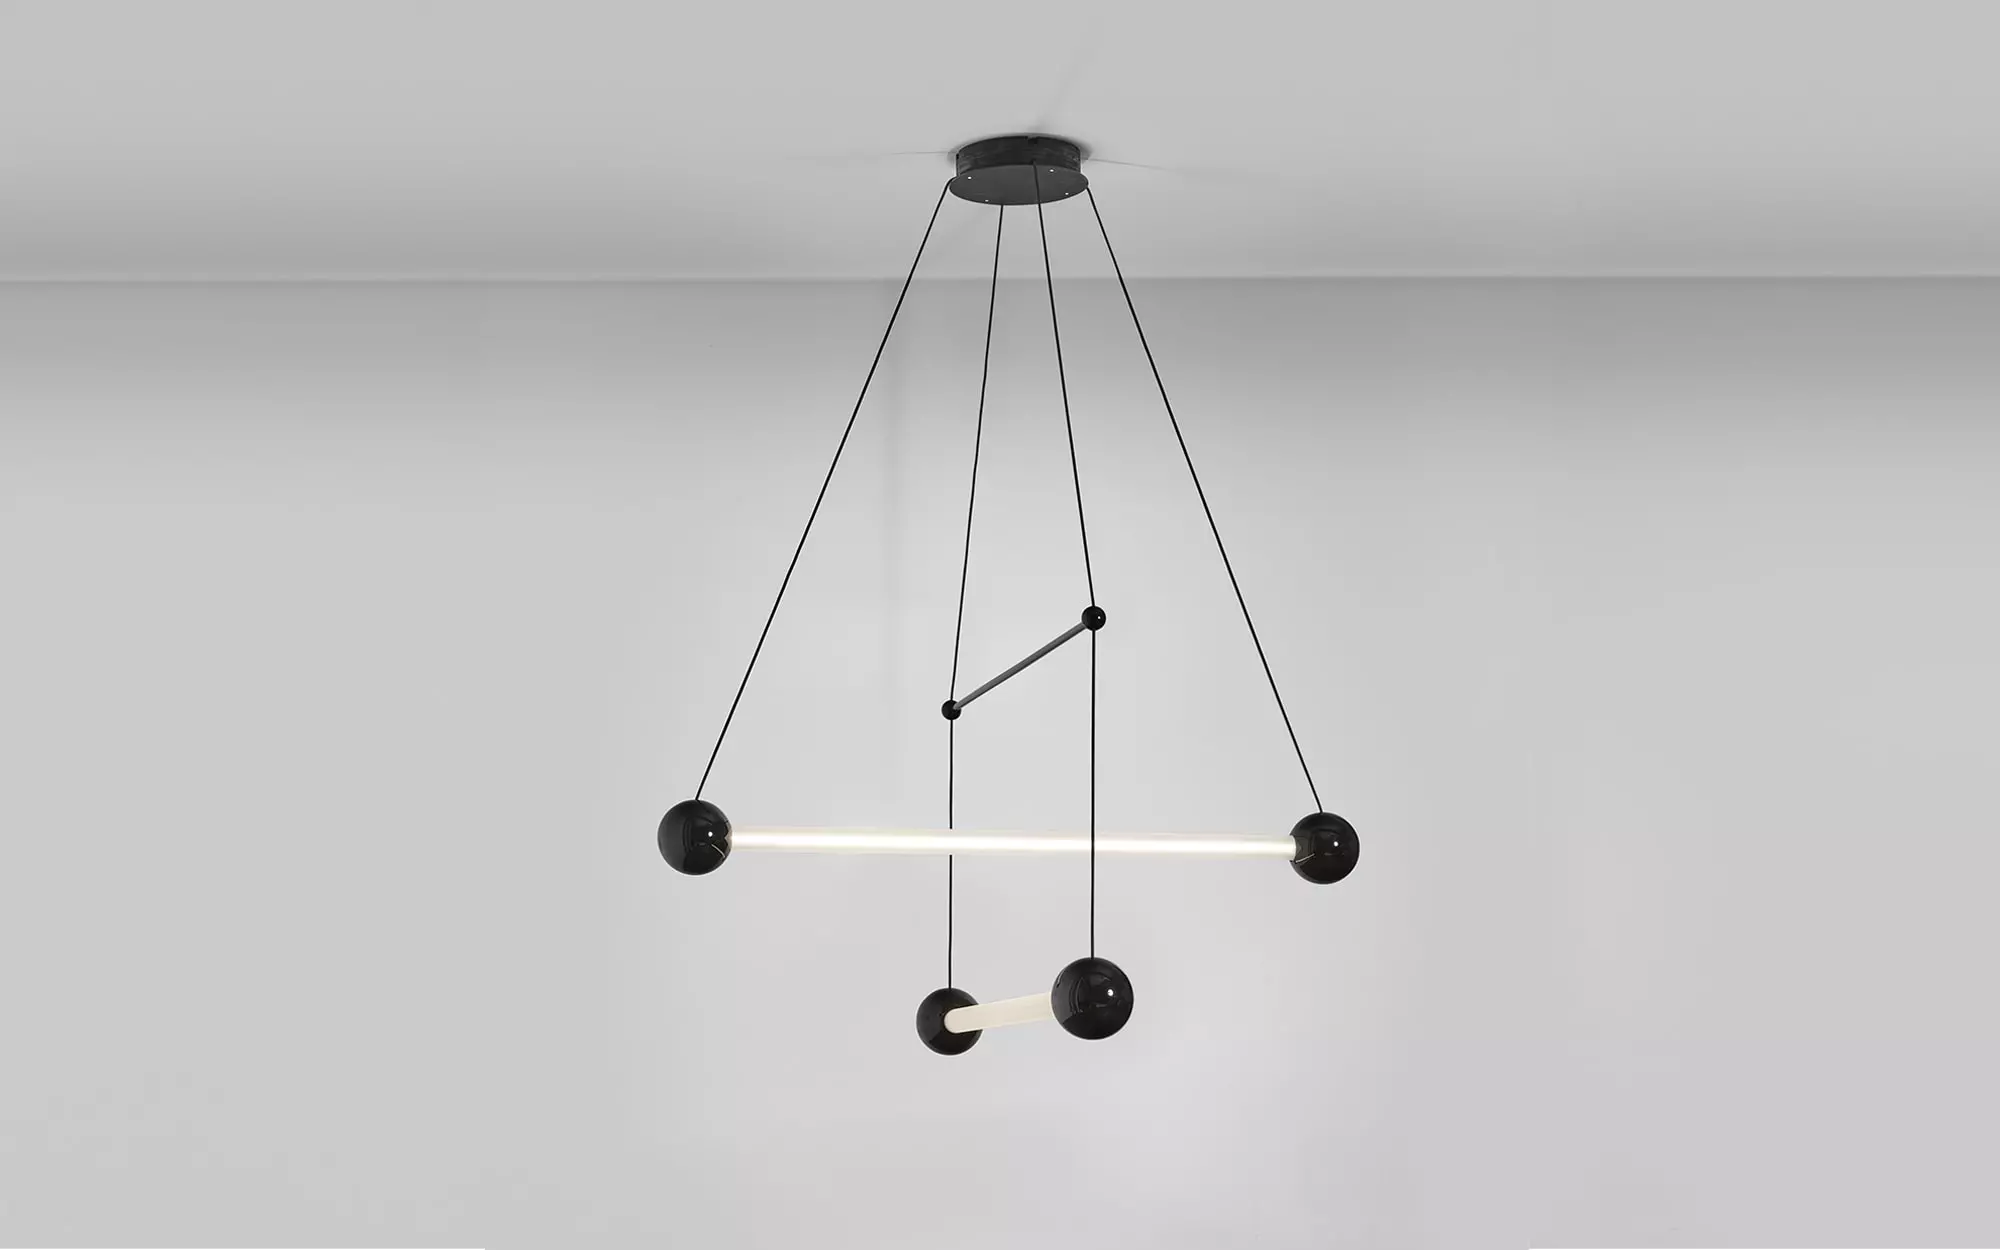 Trapeze 2 Ceiling light - Pierre Charpin - Bench - Galerie kreo